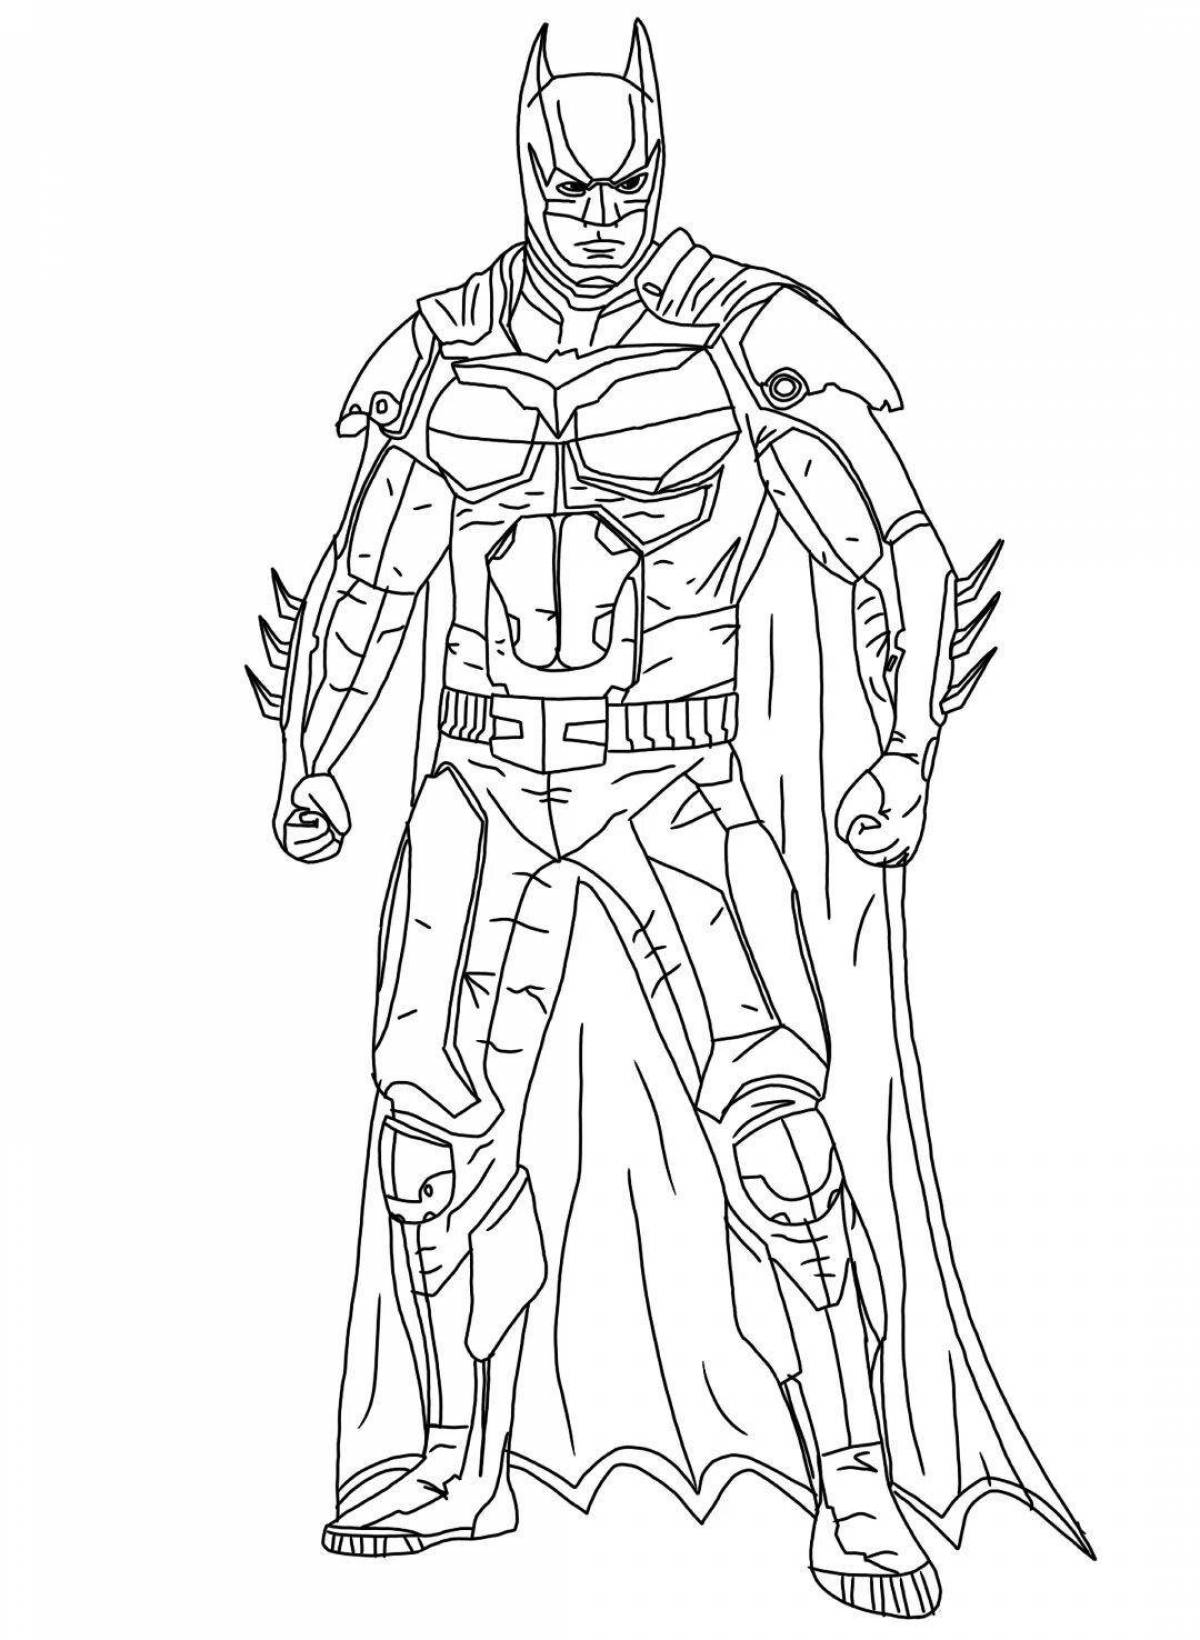 Charming dark knight coloring page